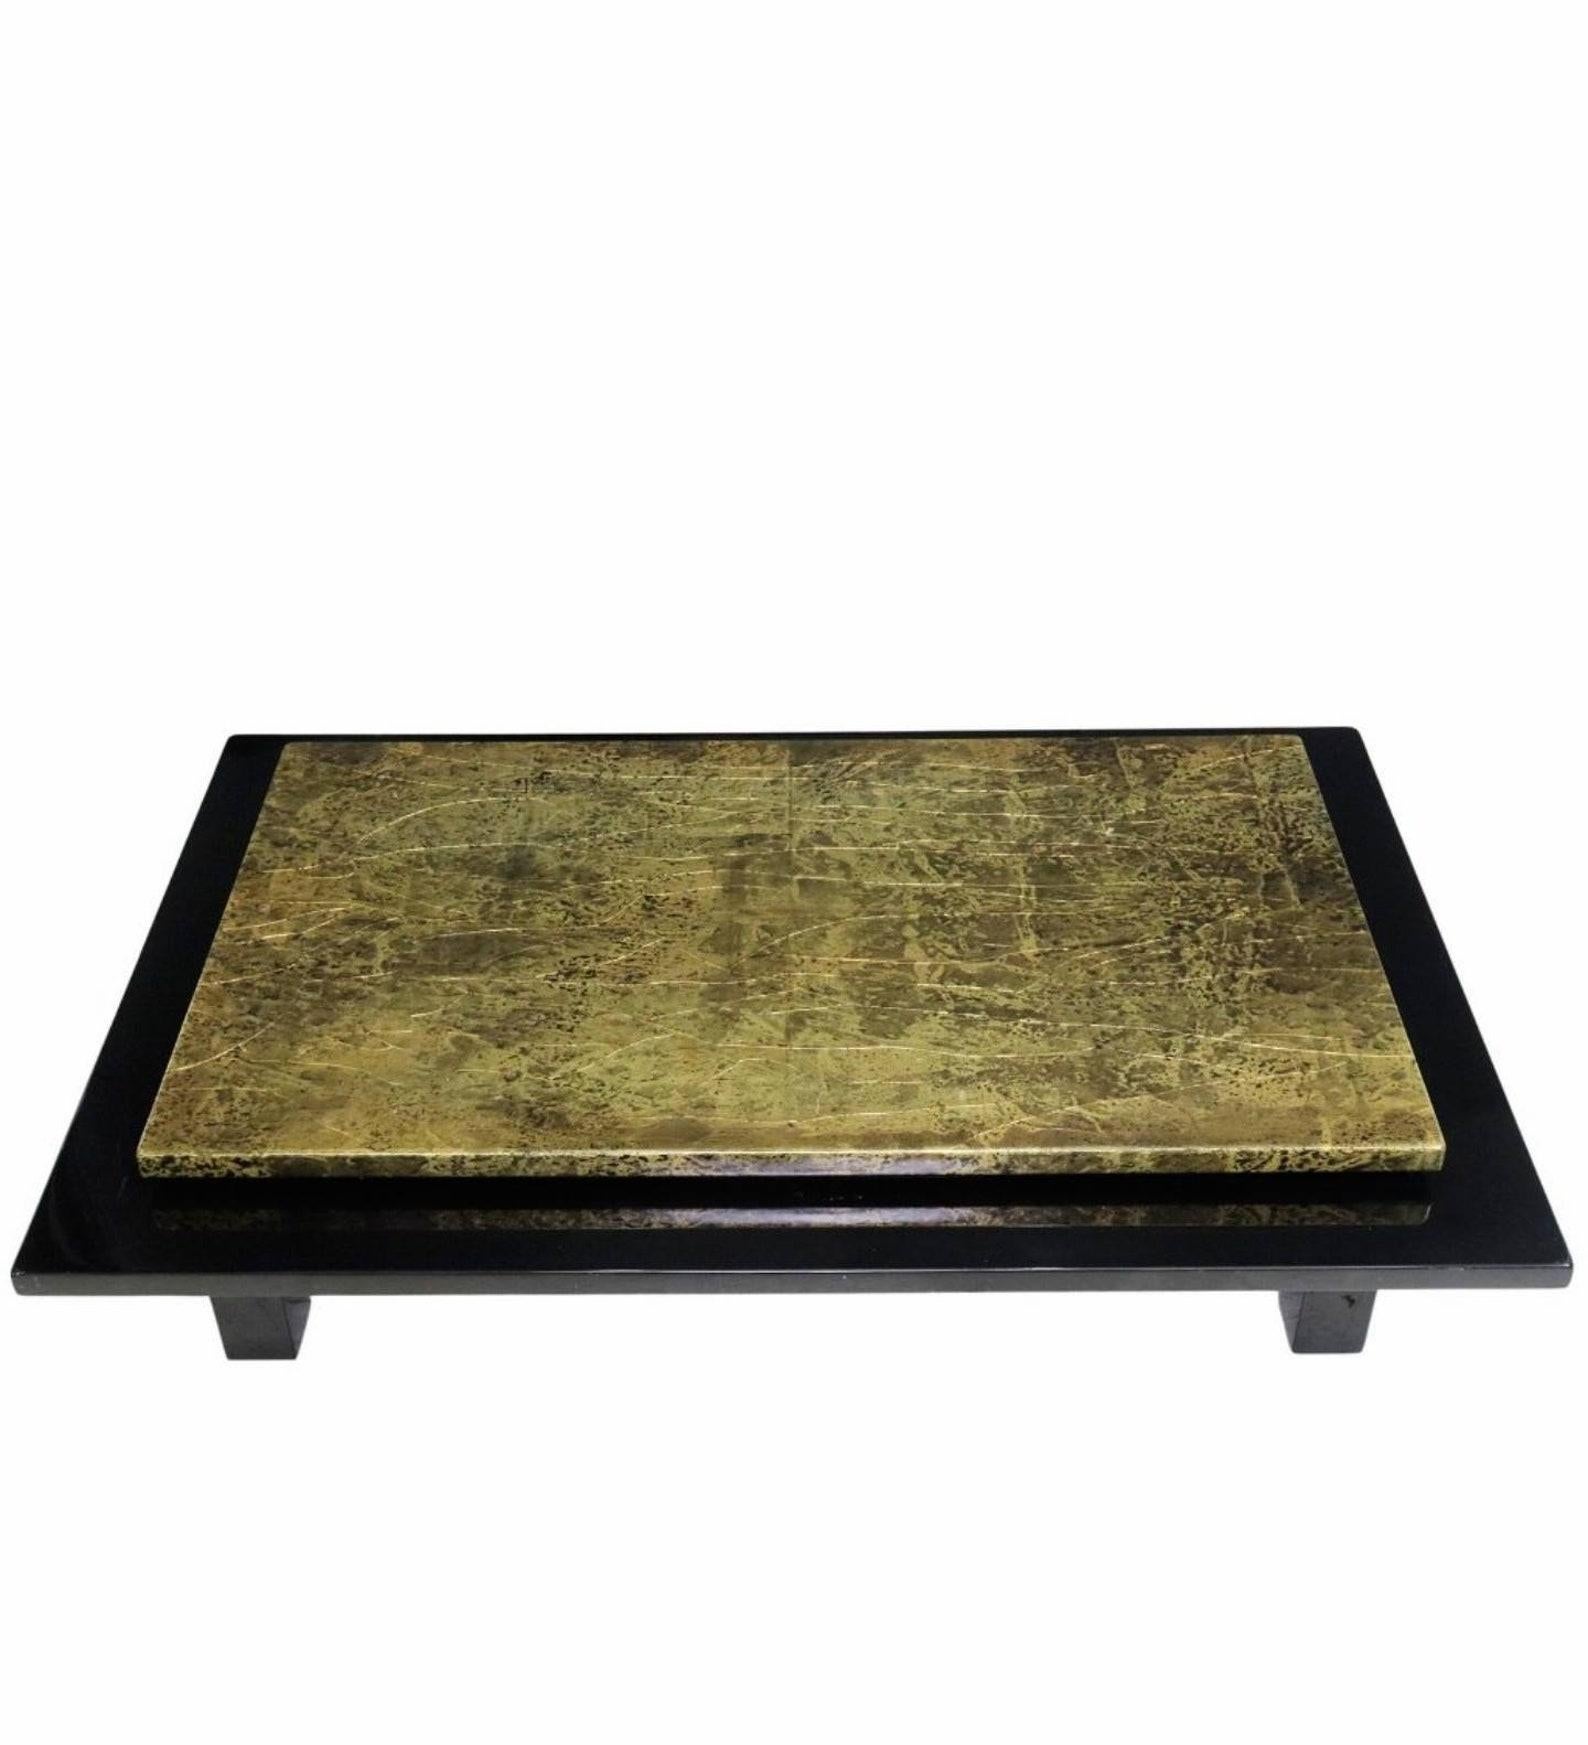 French Guy Lefevre Maison Jansen Mid-Century Modern Low Coffee Table For Sale